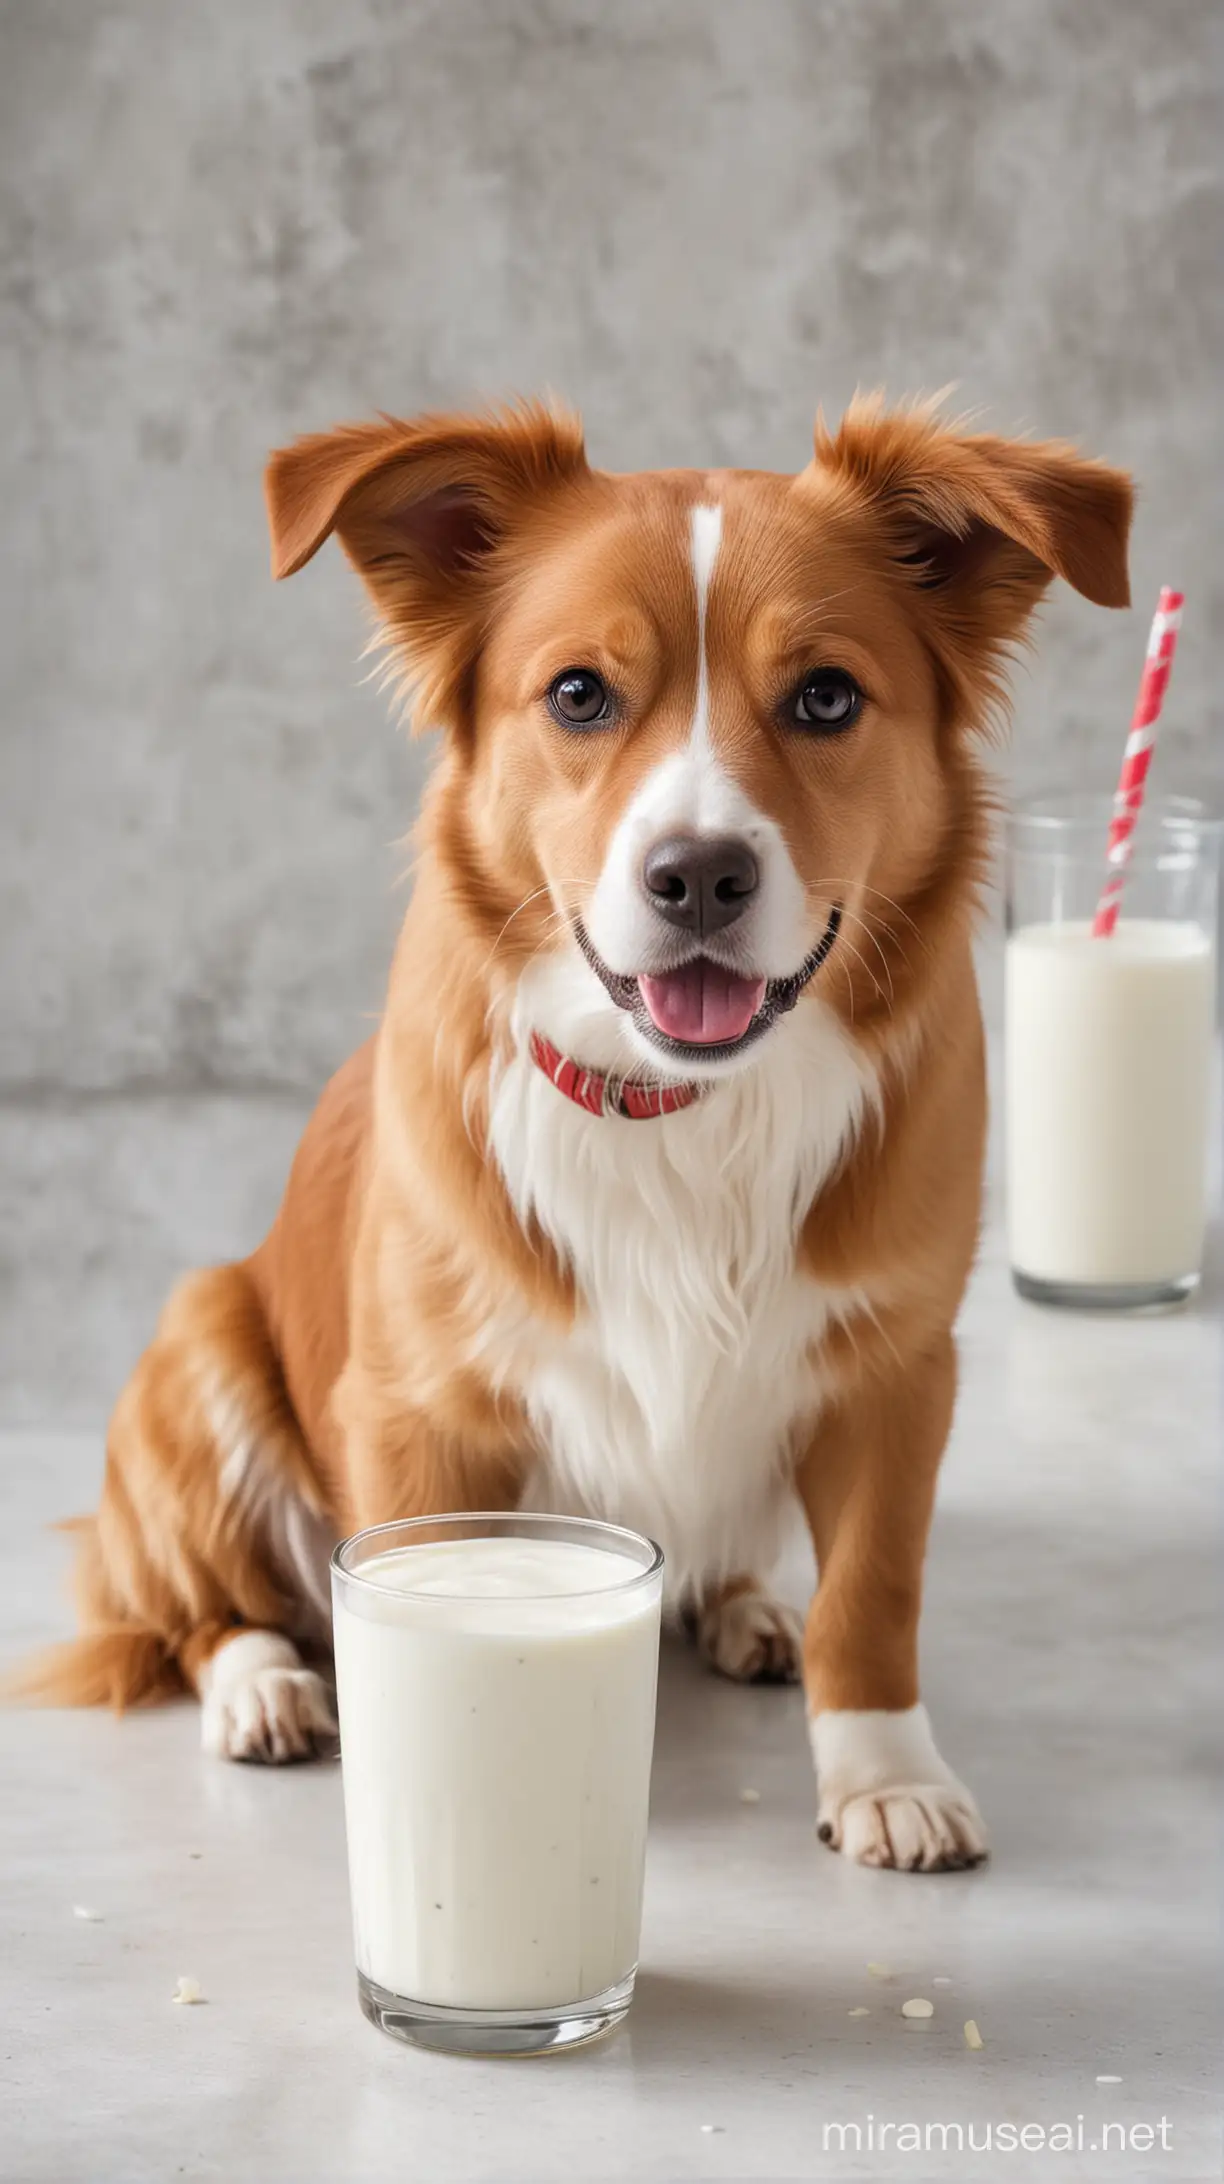 yogurt & milk homemade probiotics for dogs with cute dogs 